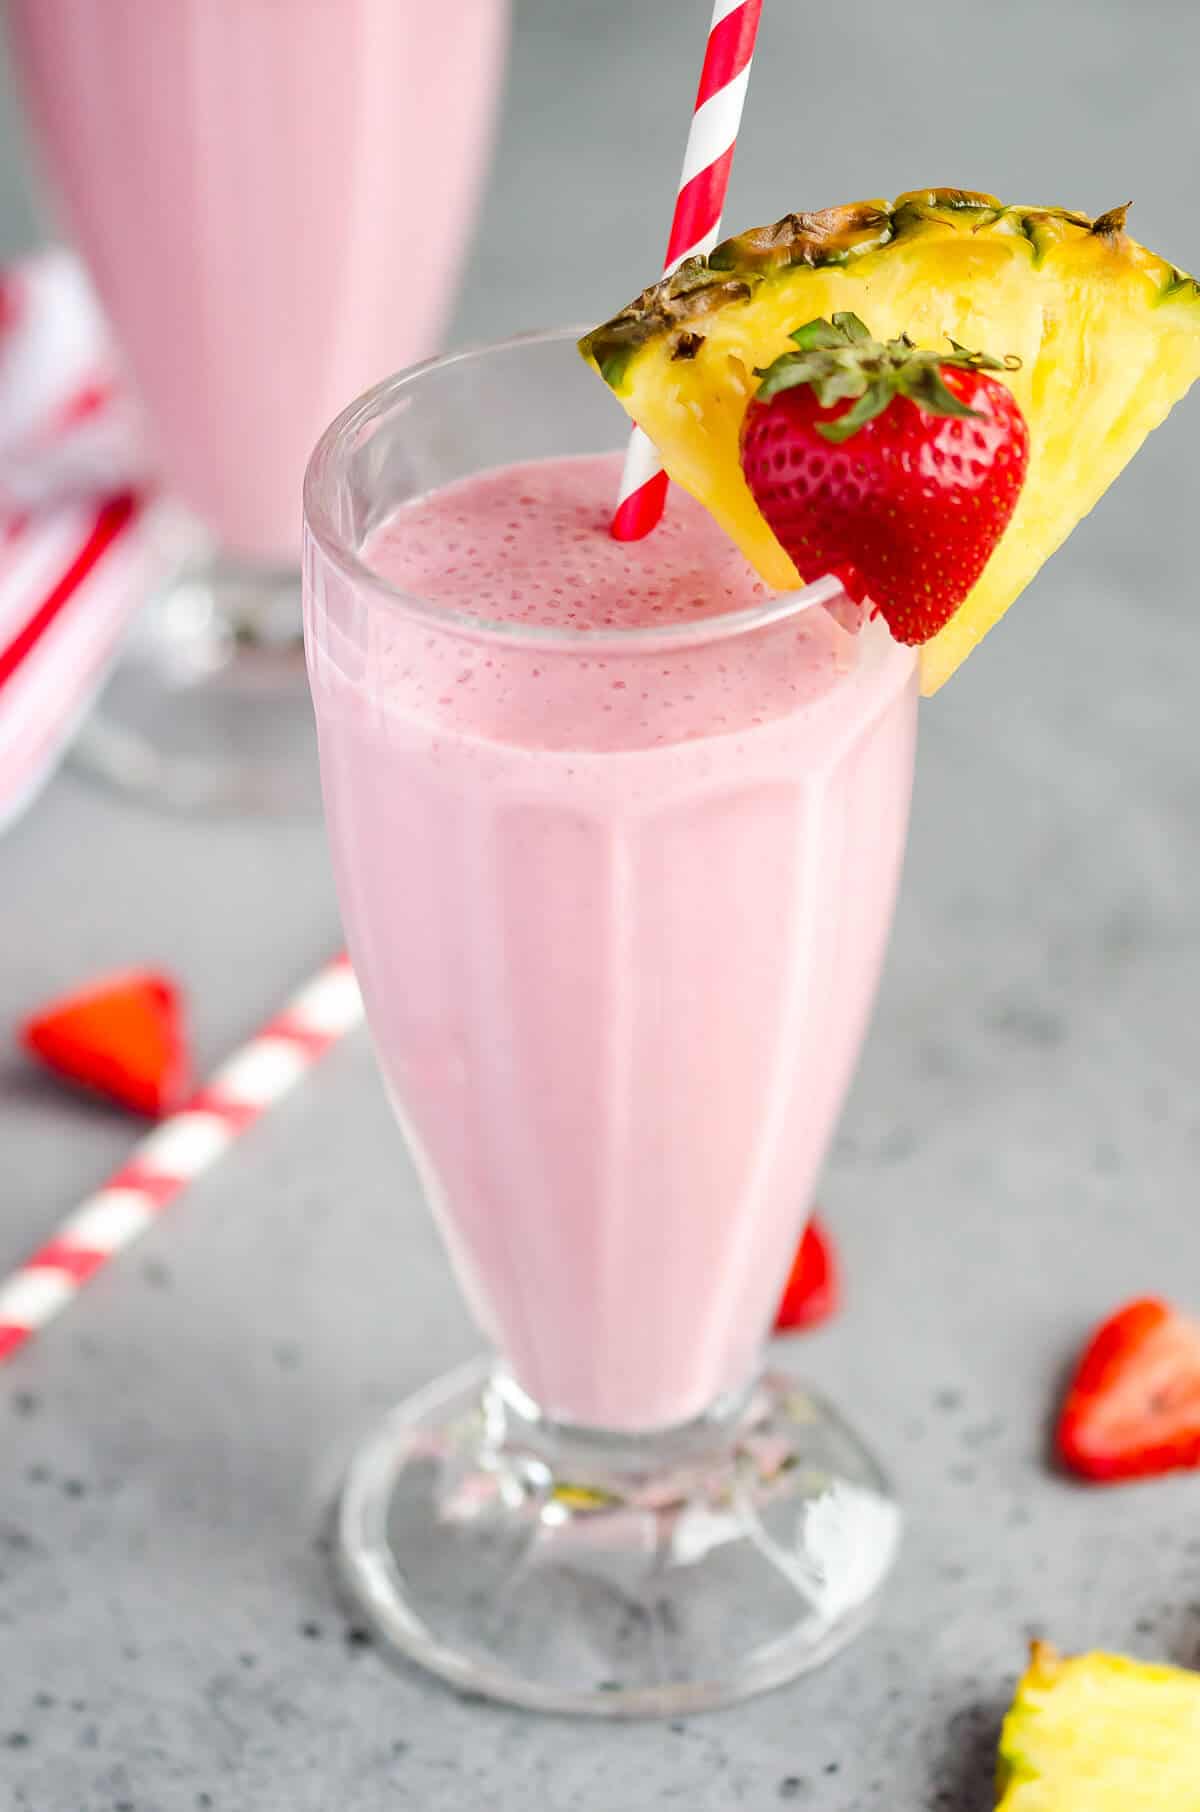 milkshake glass filled with strawberry pineapple smoothie, garnished with a slice of pineapple and a strawberry